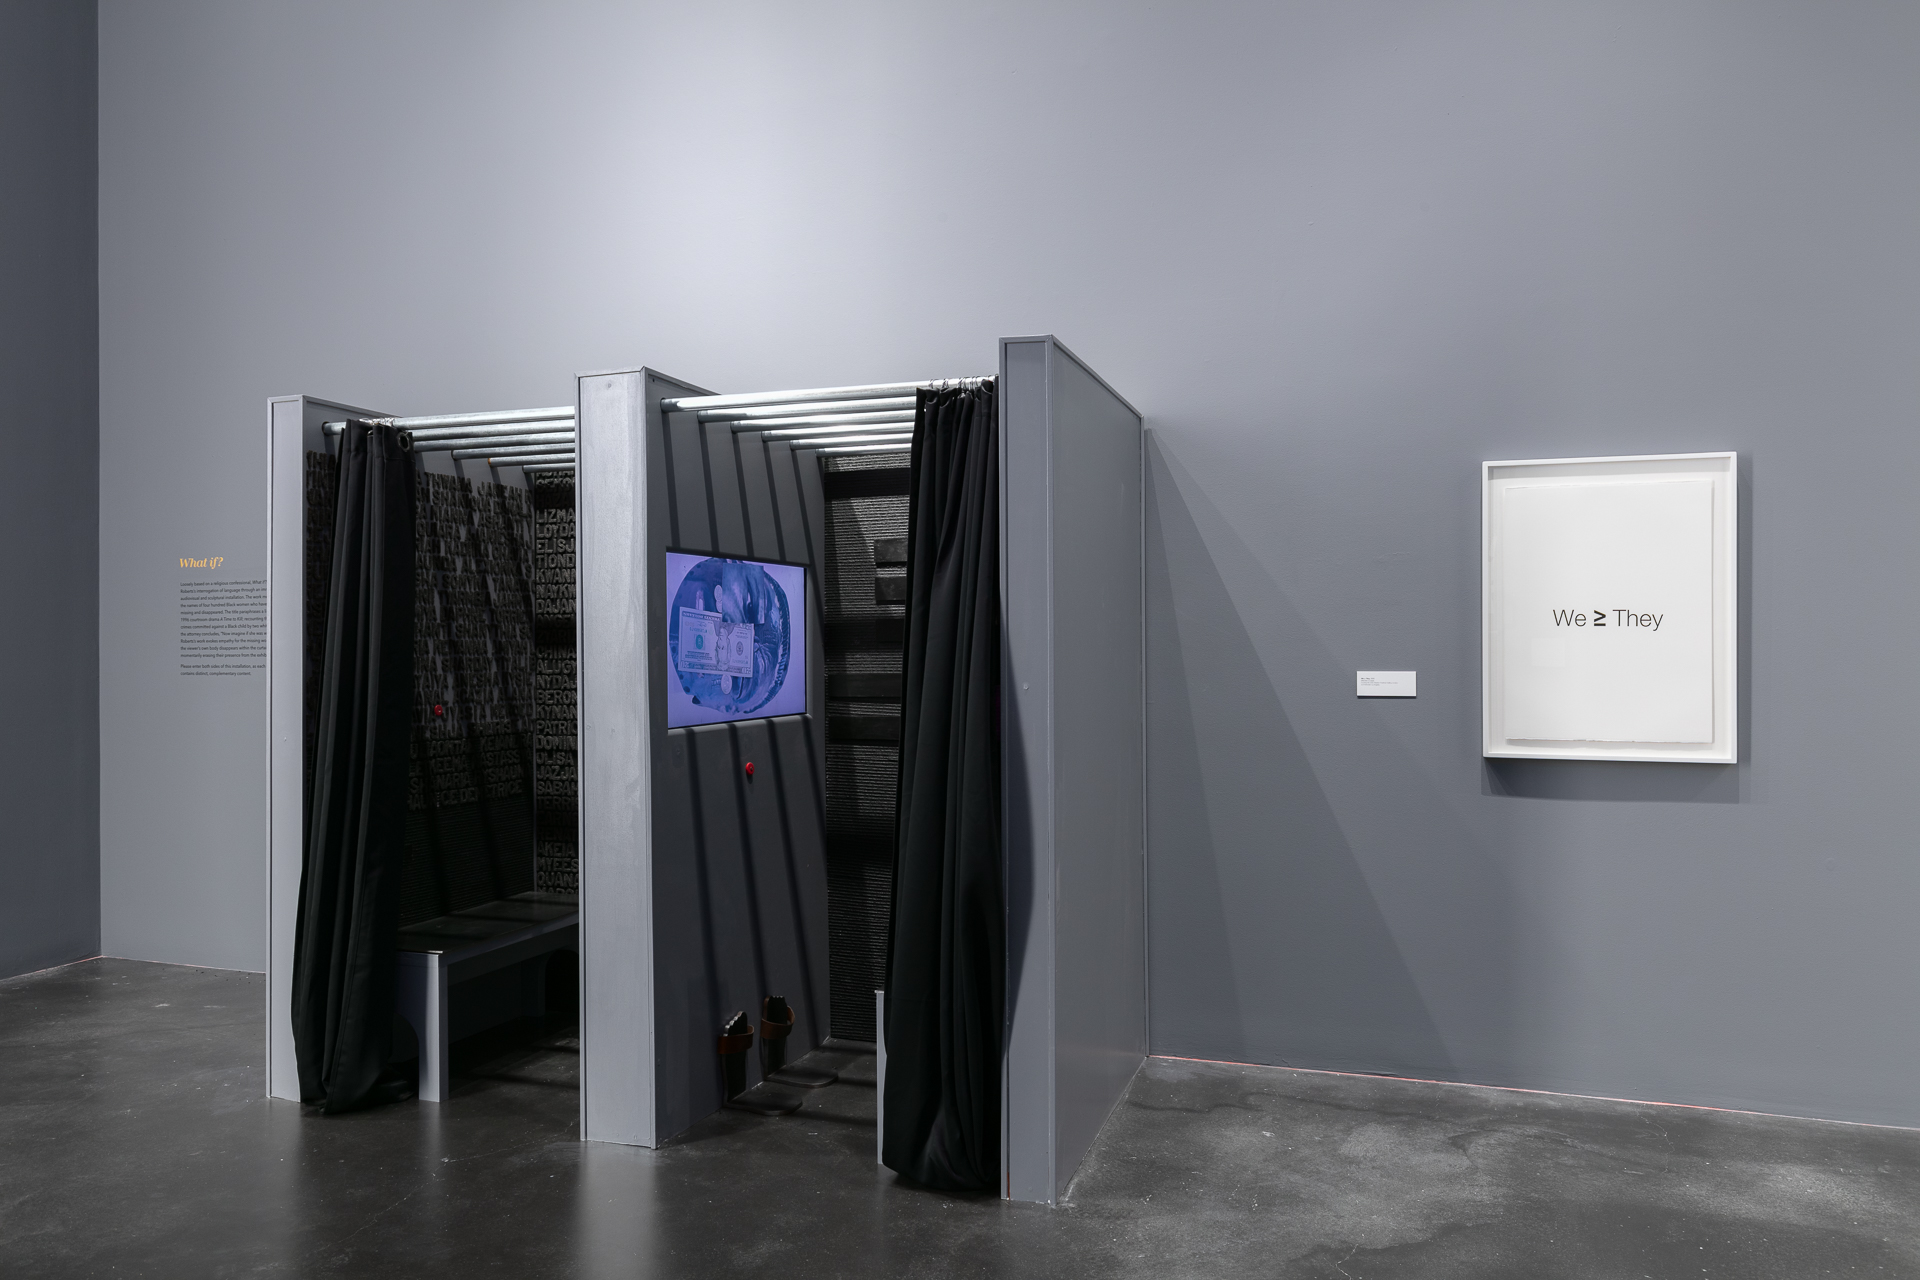 [Image description: A photograph taken in the museum of the work "What if?" by Deborah Roberts. It looks almost like a confessional booth with two curtained sides. On the walls, felt letters can be seen spelling out names of women. A video screen is visible on the wall in one side.]